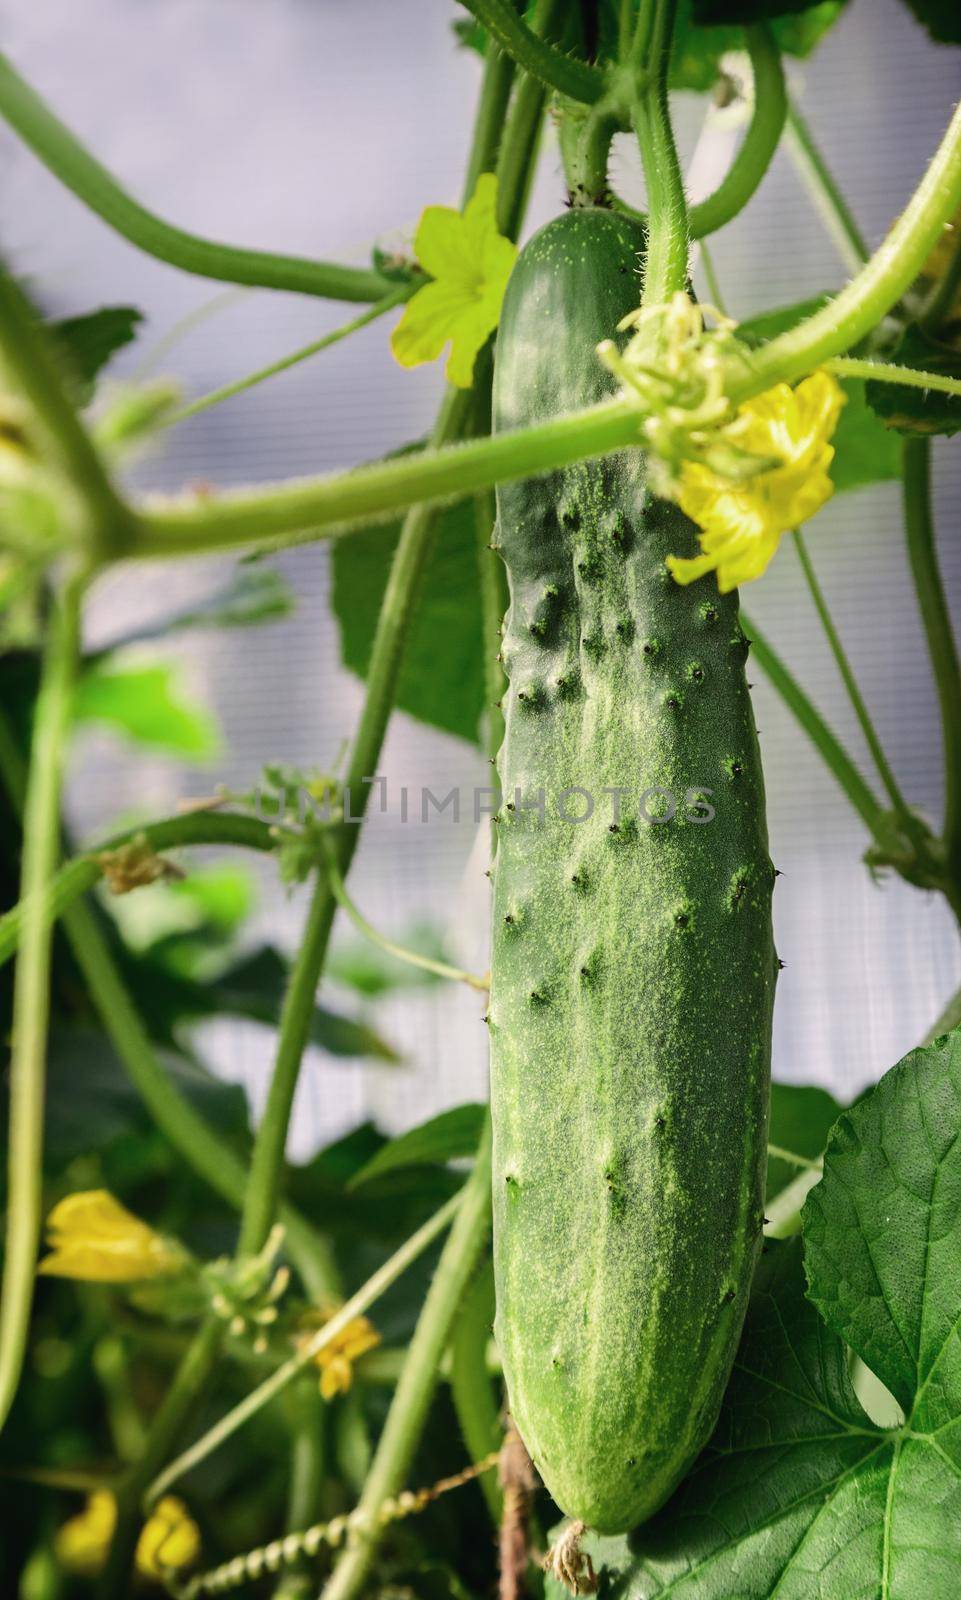 In the greenhouse grows a young cucumber. by georgina198